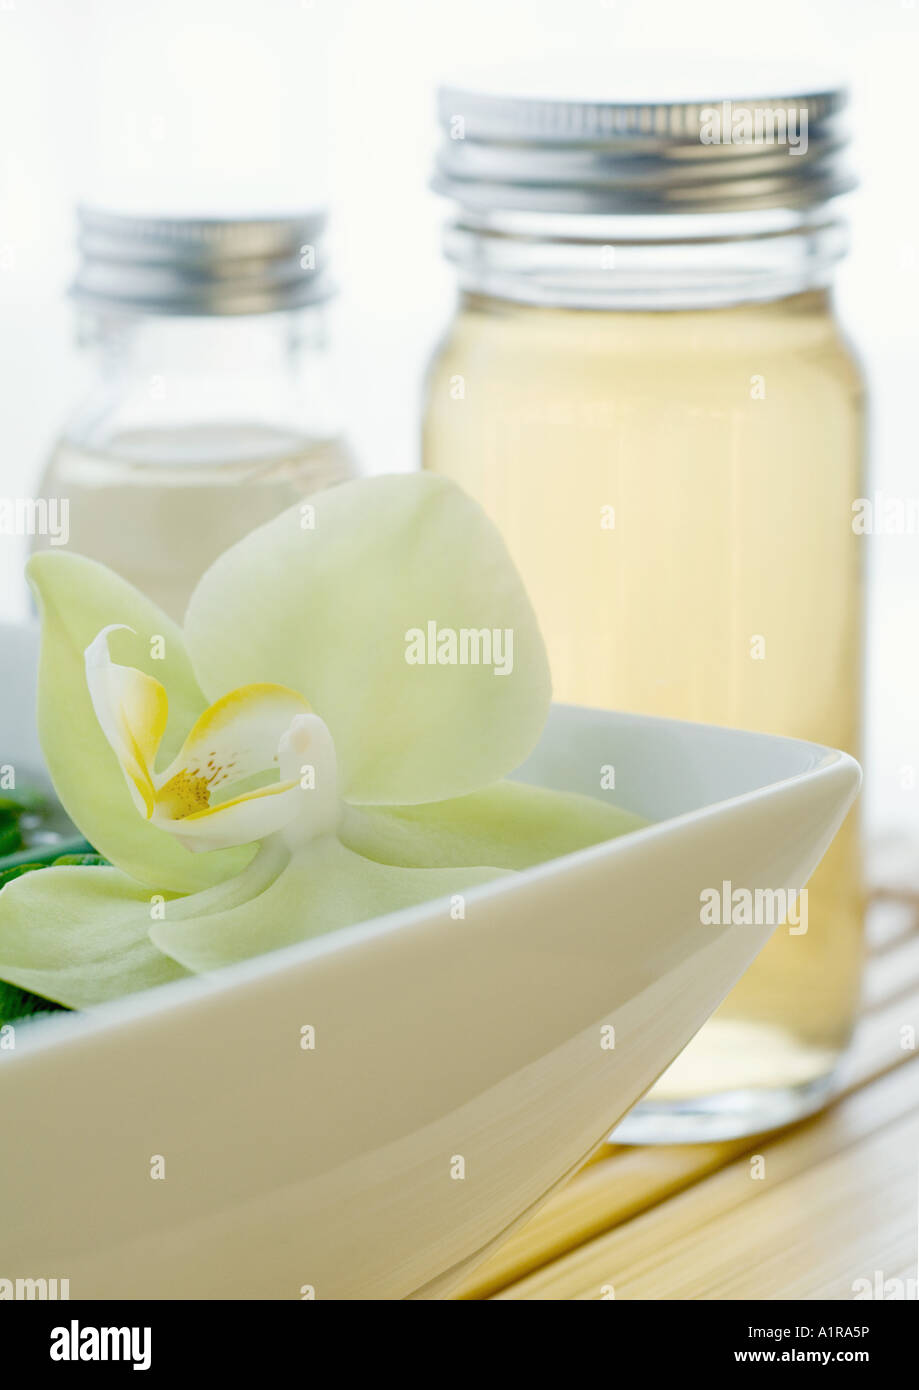 Orchid blossom and bottles of essential oils Stock Photo